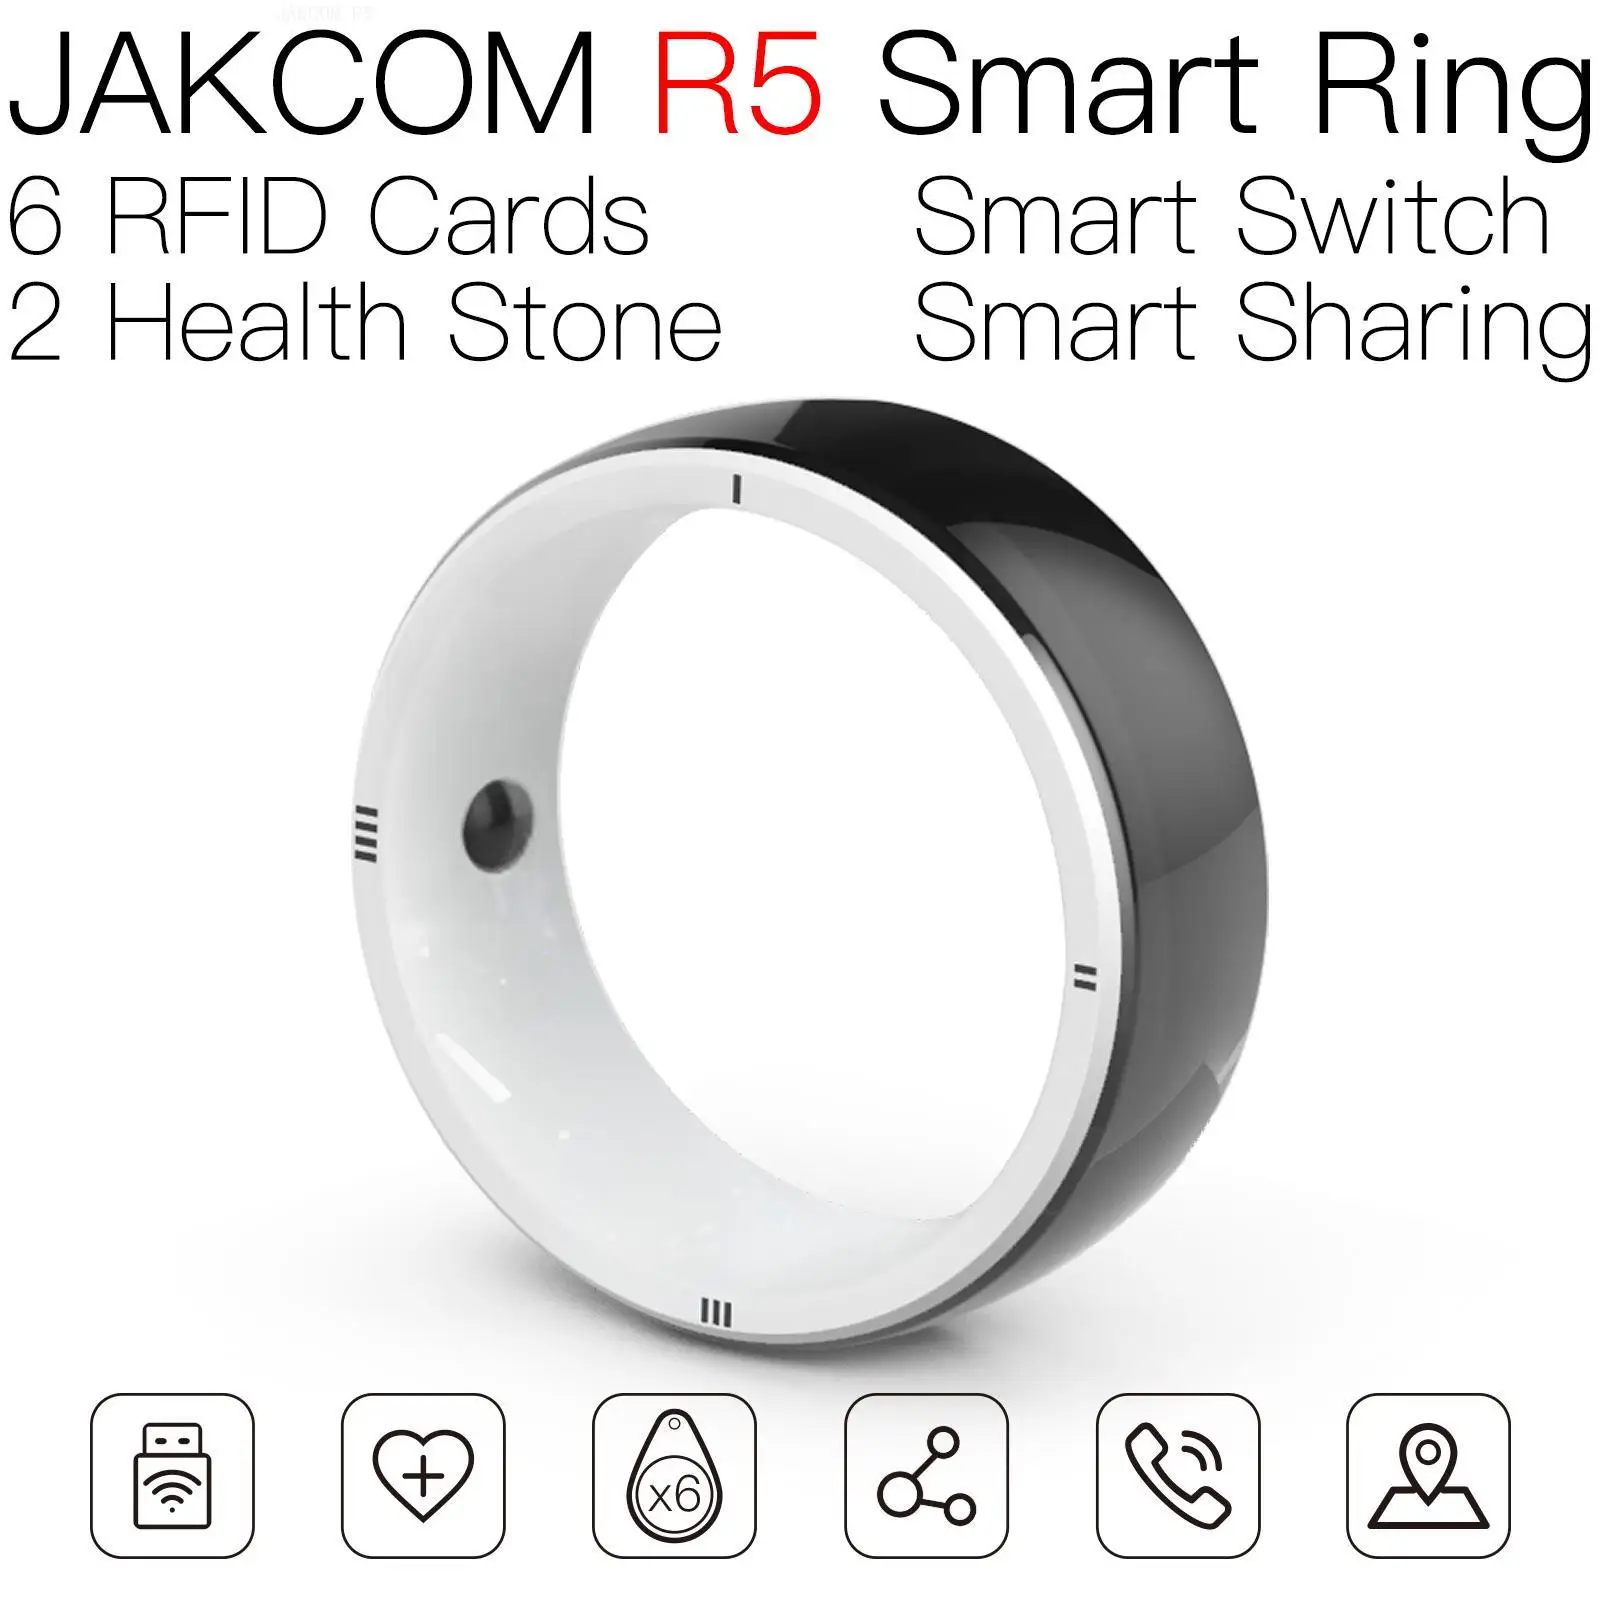 

JAKCOM R5 Smart Ring Match to pos nfs copy eprom synthetic tying material impact tag pet qr code rfid sticker